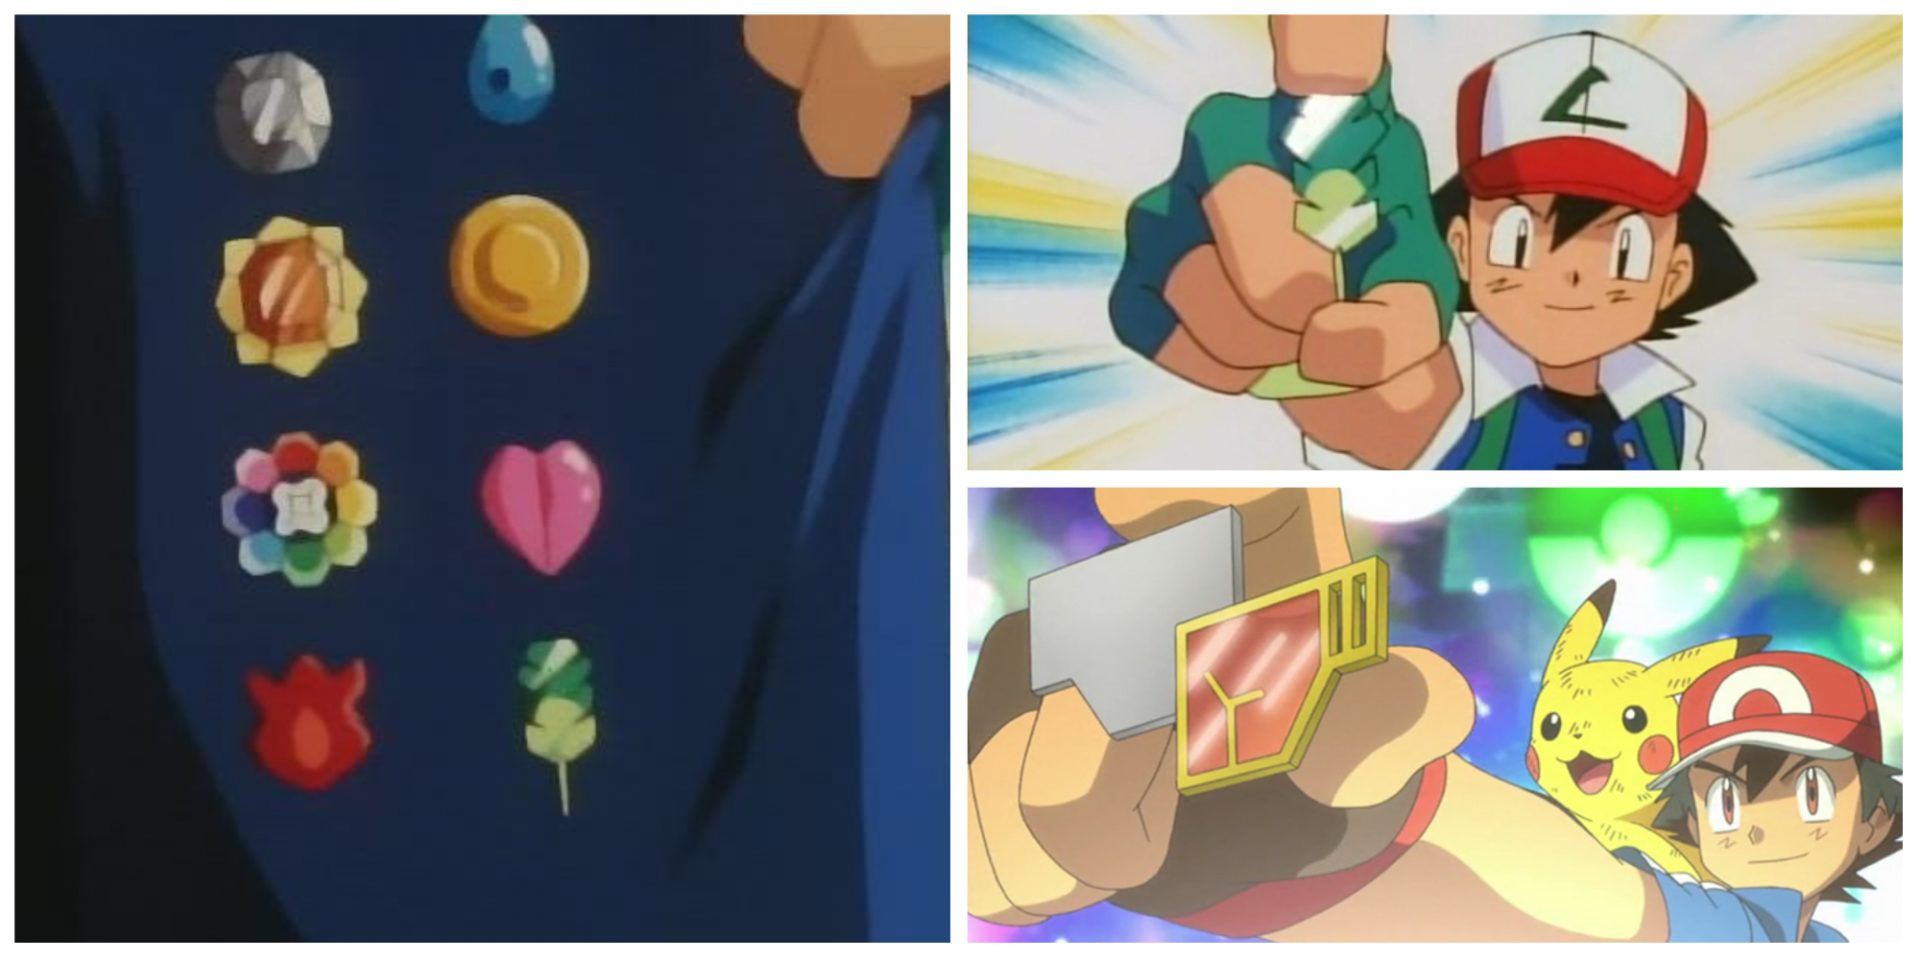 Ash showing off all of his badges